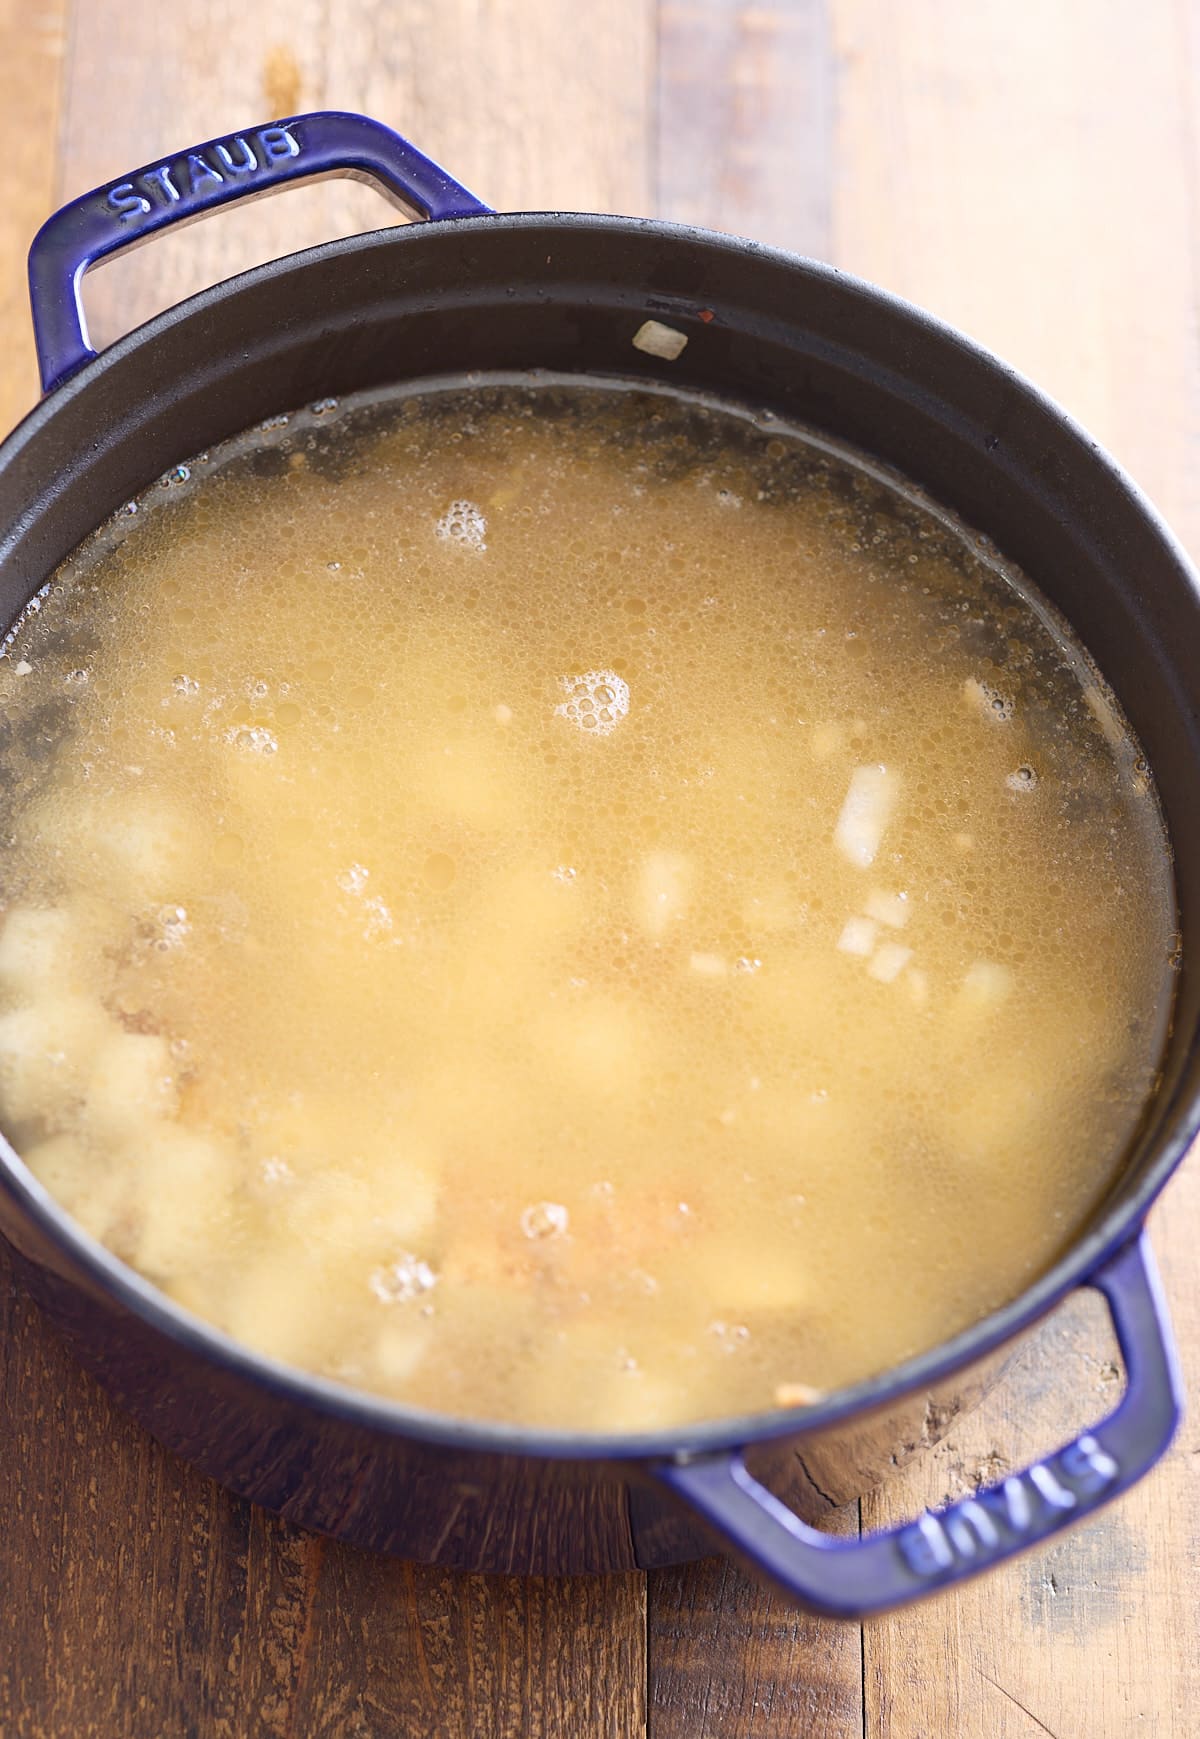 Broth and potatoes added to the pot.